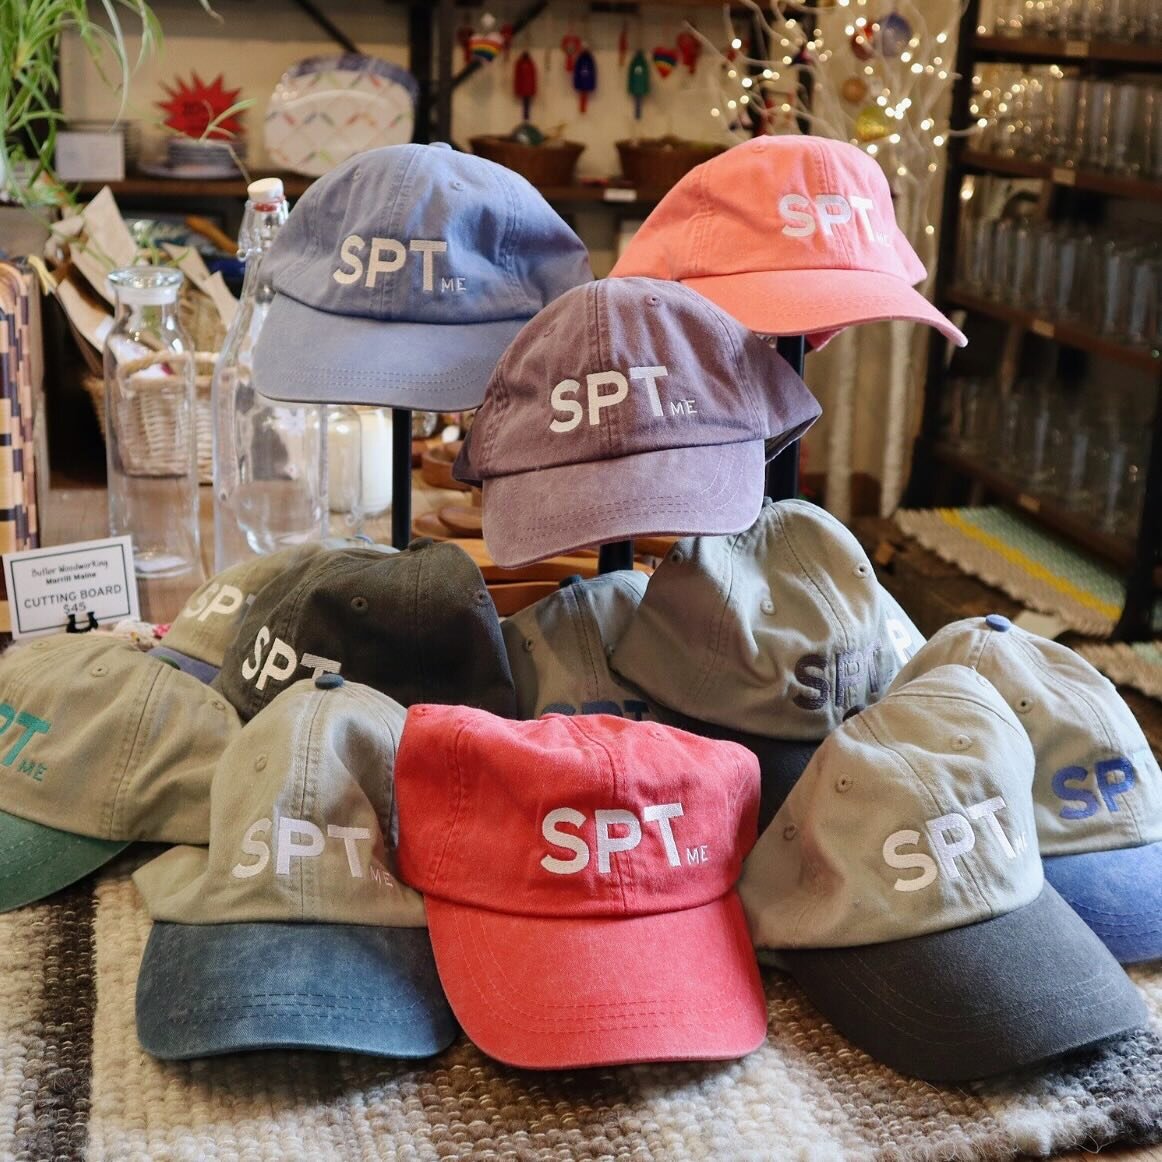 We&rsquo;re hat people! We have a wide variety and Southport &amp; Maine hats on our website and in store. 

Shop the Barn online through SouthportGeneralStore.com 

#spt #southpormaine #midcoastmaine #boothbayharbor #southportgeneralstore #generalst